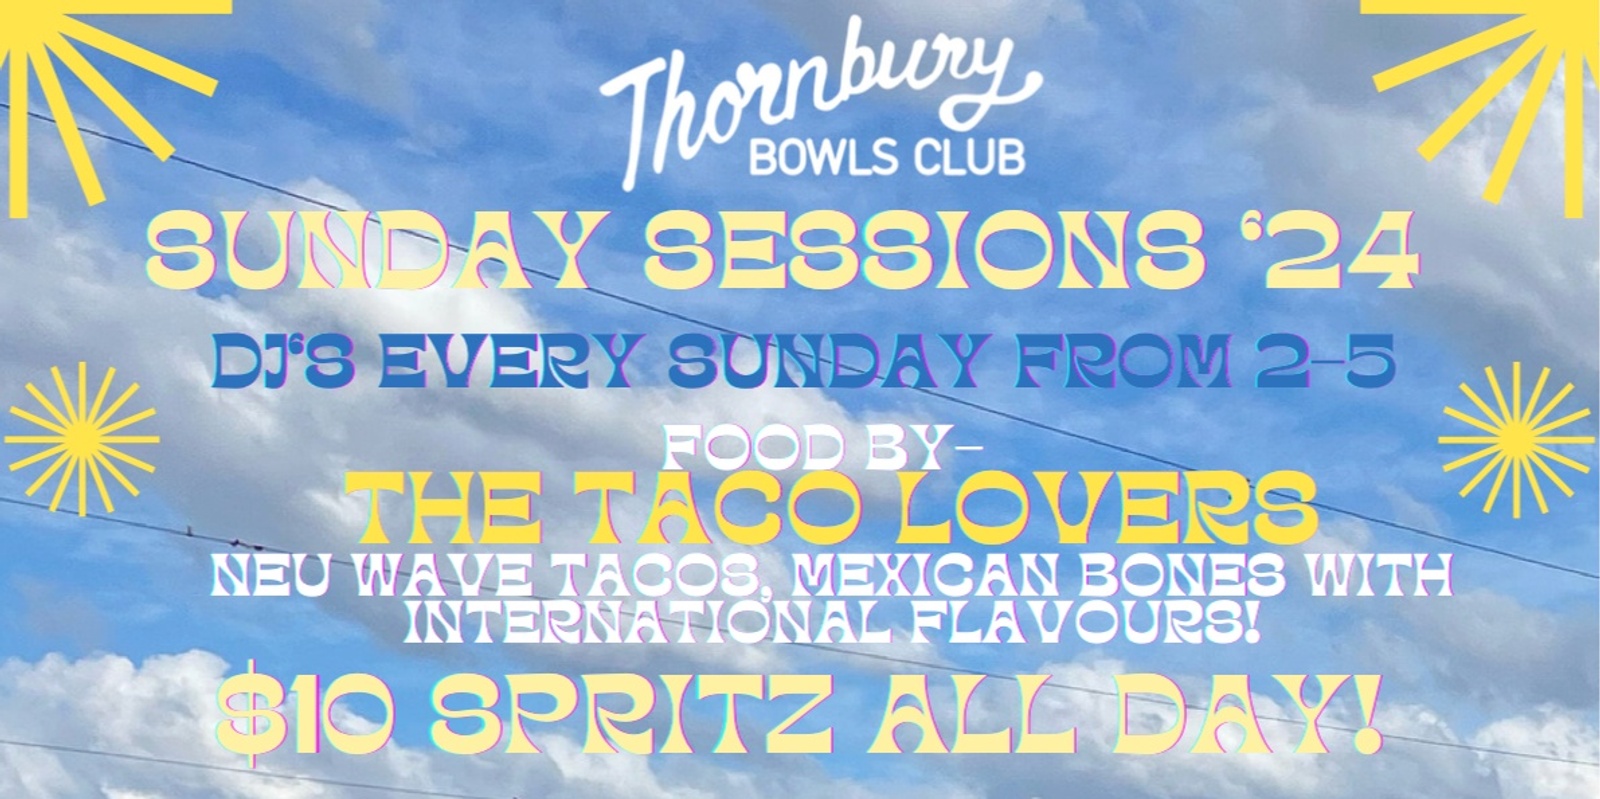 Banner image for Sunday Sessions at Thornbury Bowls